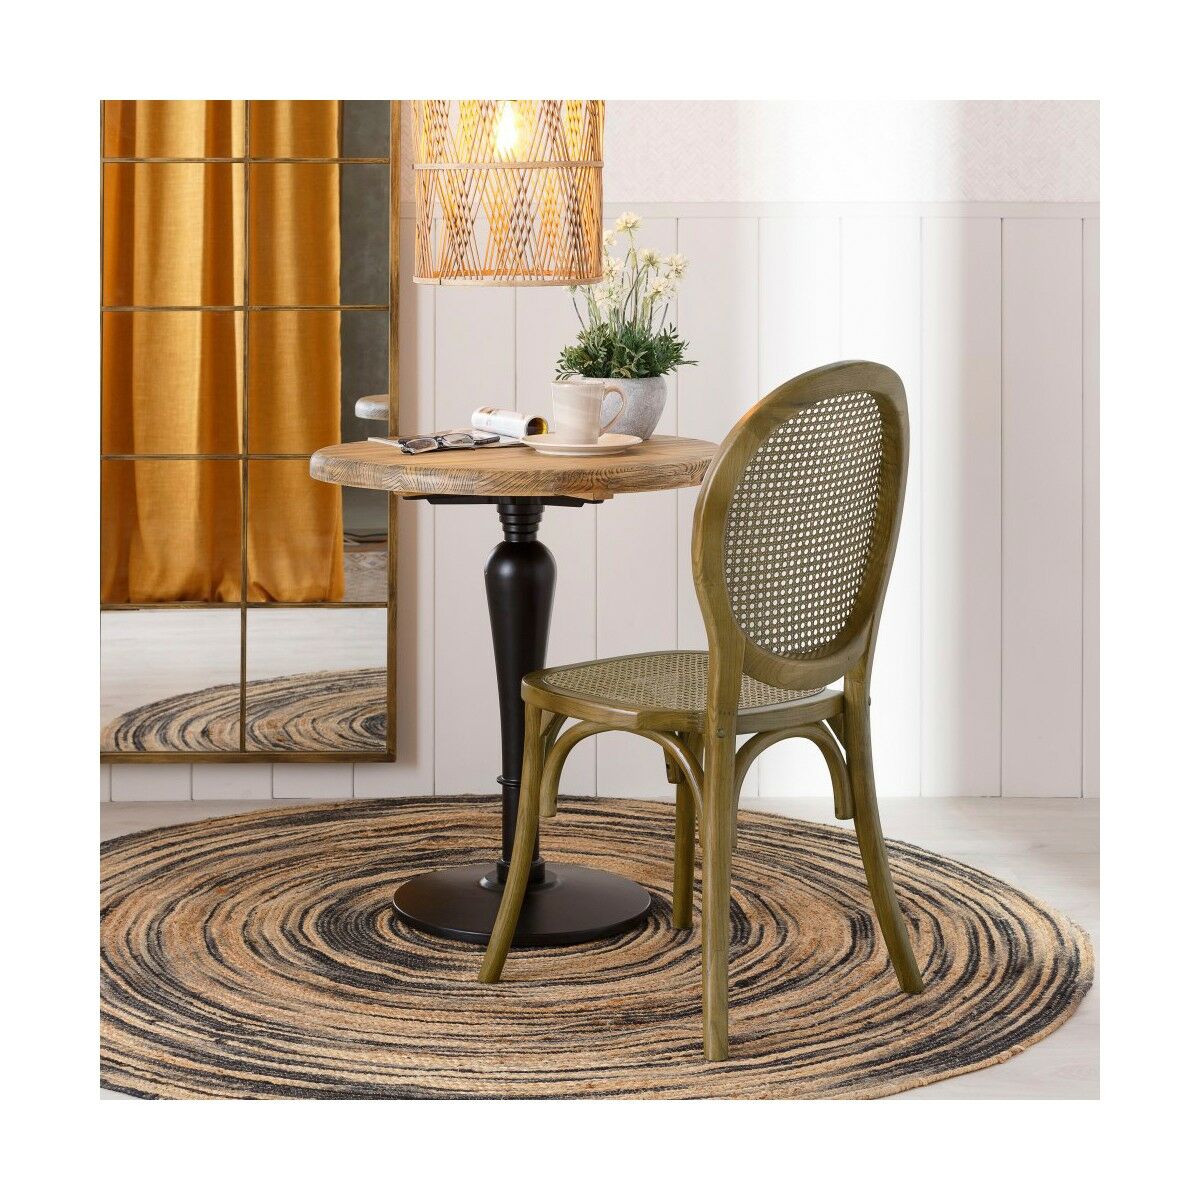 Dining Chair in Wood and Rattan (45 x 42 x 94 cm)